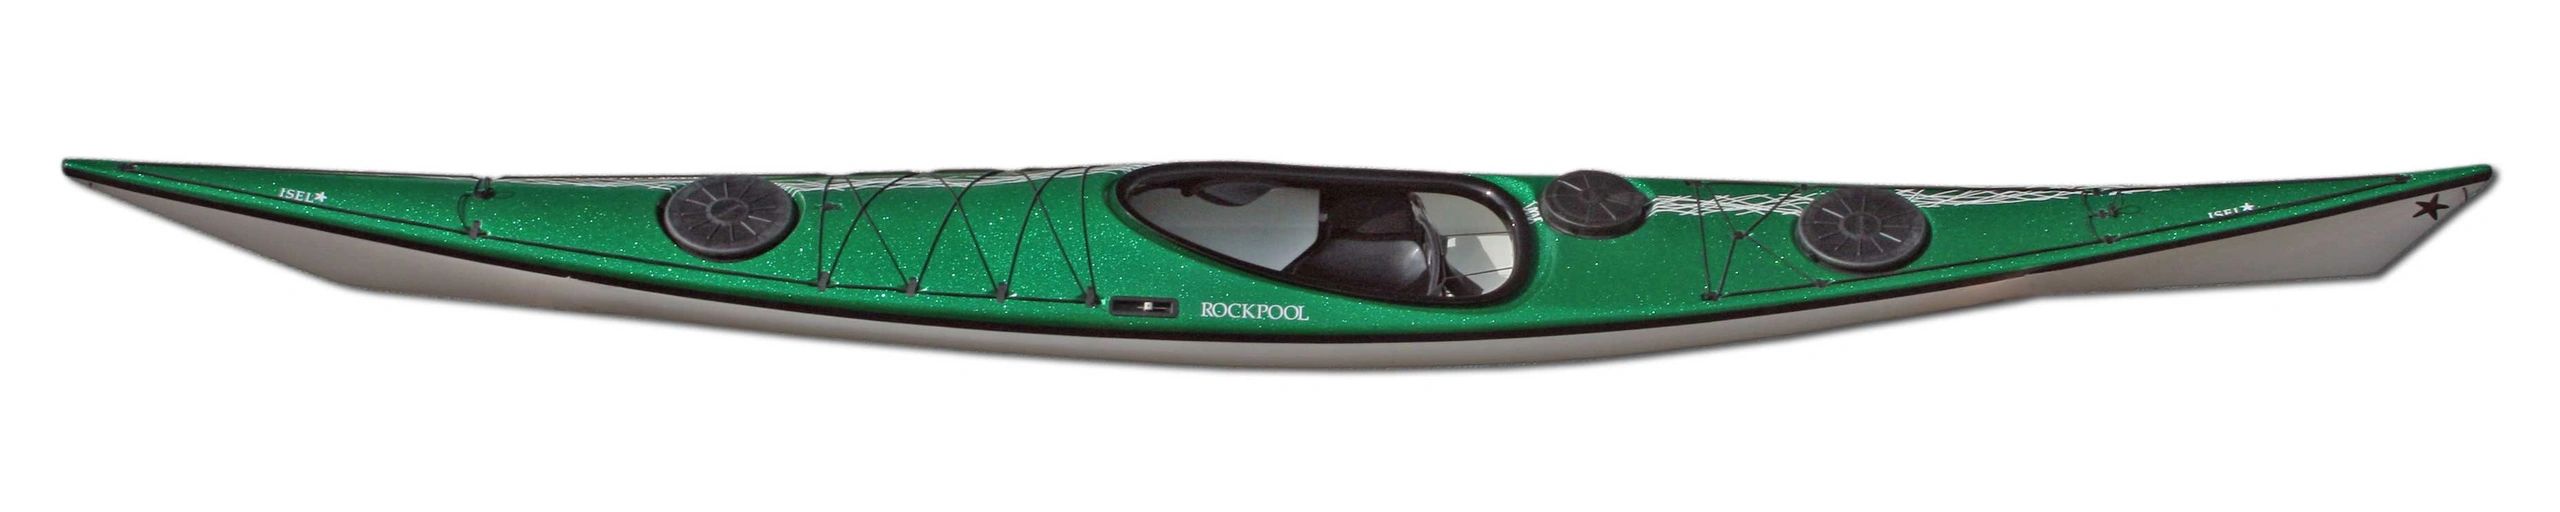 Rockpool Isel sea kayak in composite construction